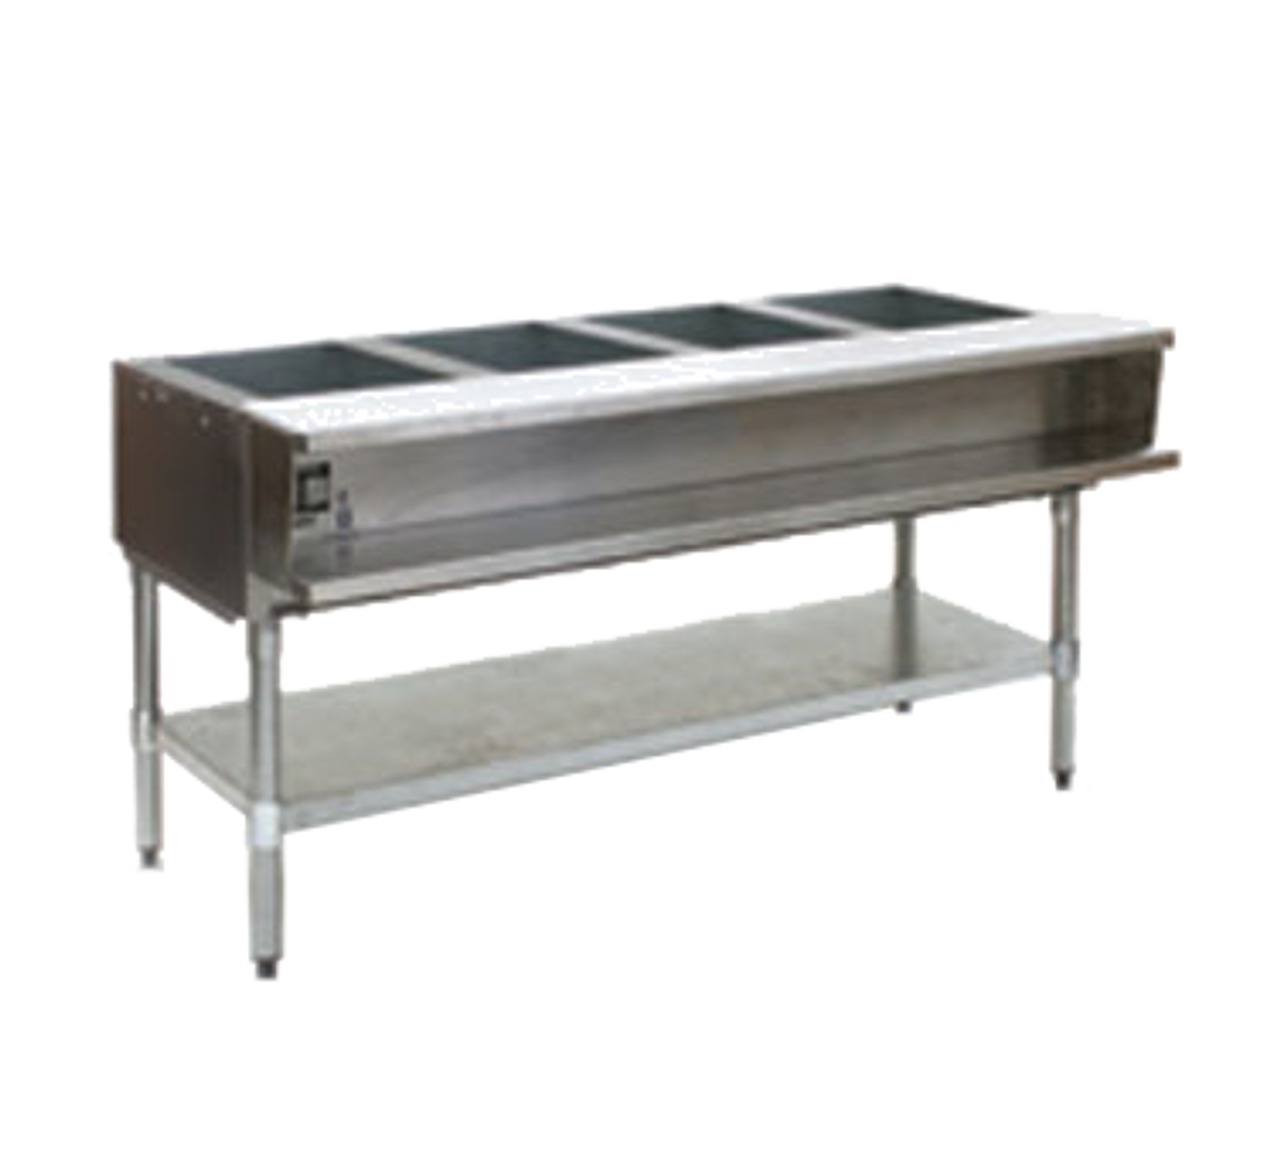 Water Bath Hot Food Table, specify gas, open base, 63-1/2"W x 30-1/2"D x 34-1/2"H, 20/430 highly polished stainless steel top & body, (4) 12" x 20" stainless steel wells, 1/2" N.P.T. pipe connection on right, stainless steel dish shelf, removable 63-1/2"W x 8"D polycarbonate cutting board, 1-5/8"dia. galvanized legs, galvanized undershelf, adjustable plastic feet, 30,000 BTU, NSF, cULus